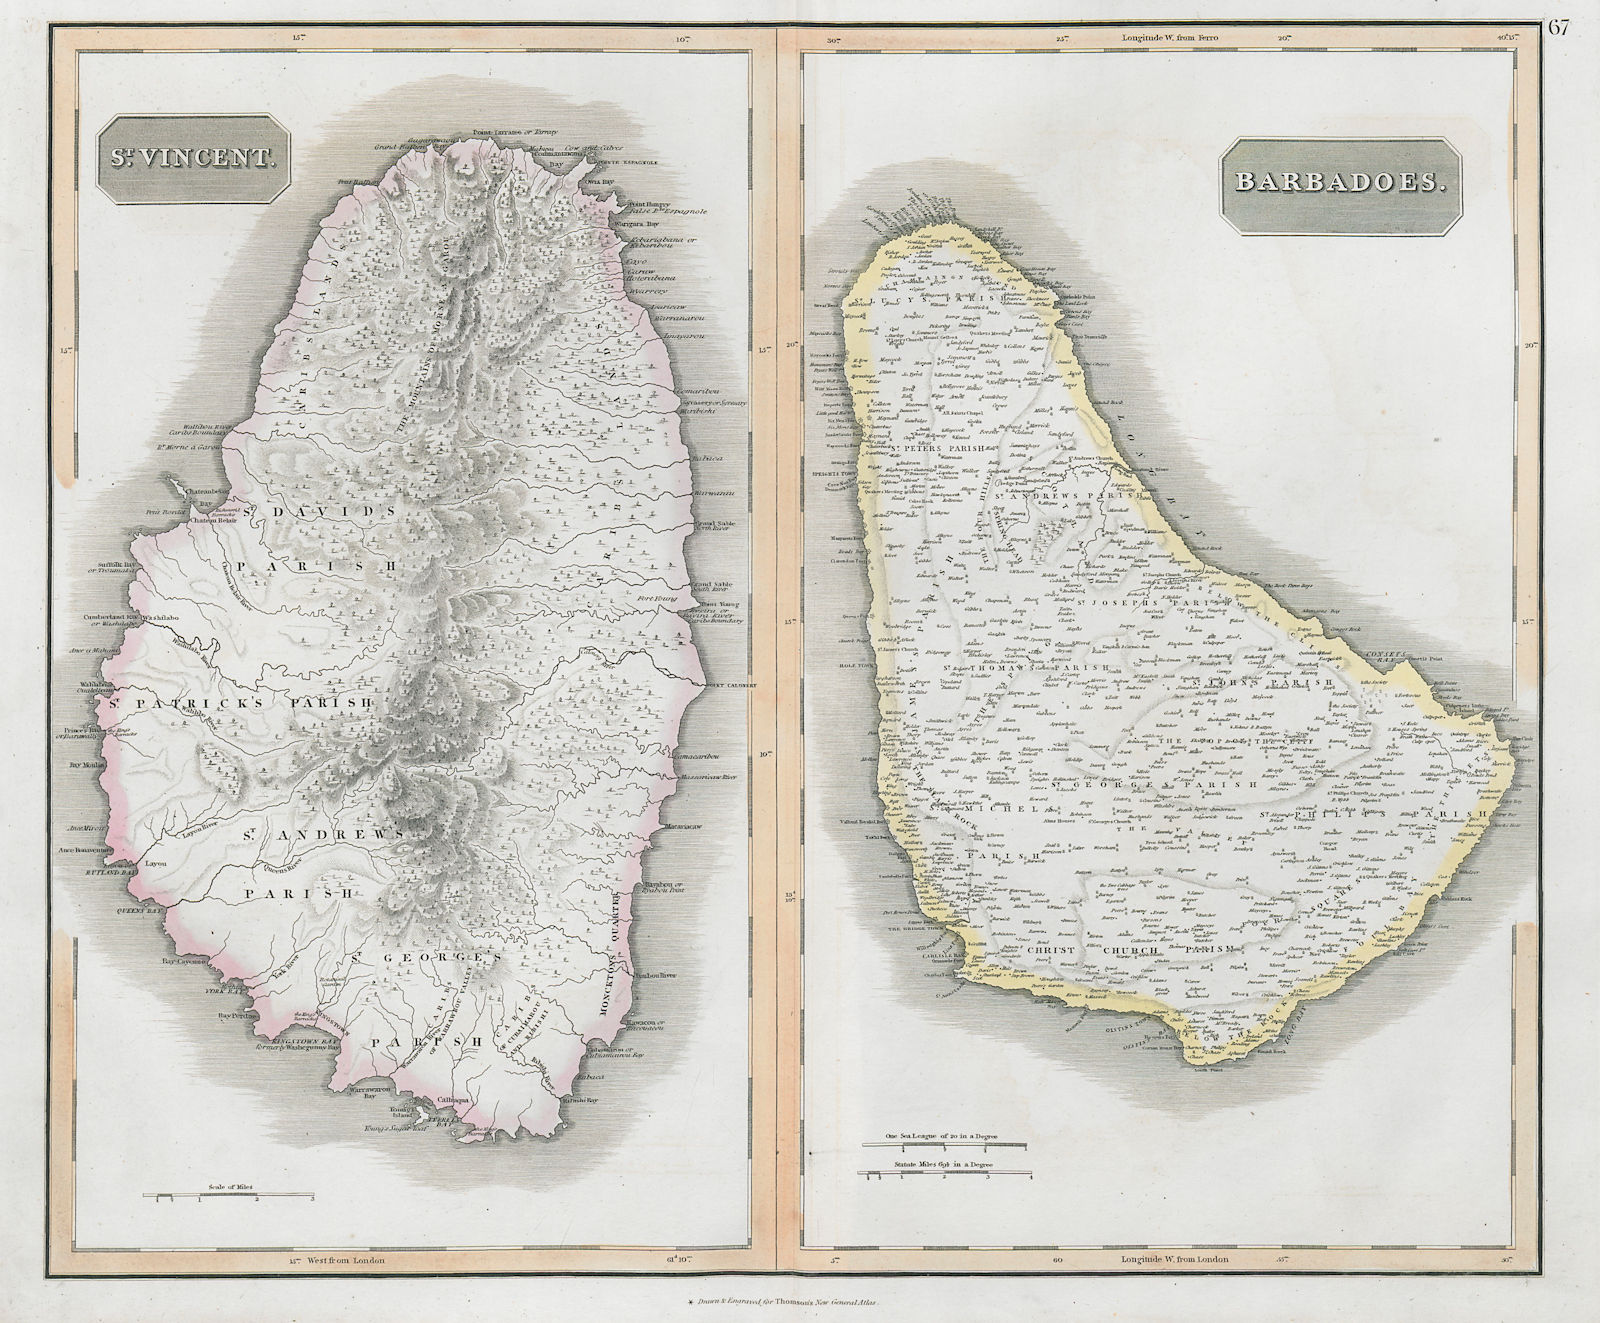 Associate Product St Vincent & "Barbadoes". Barbados. West Indies Caribbean. THOMSON 1830 map